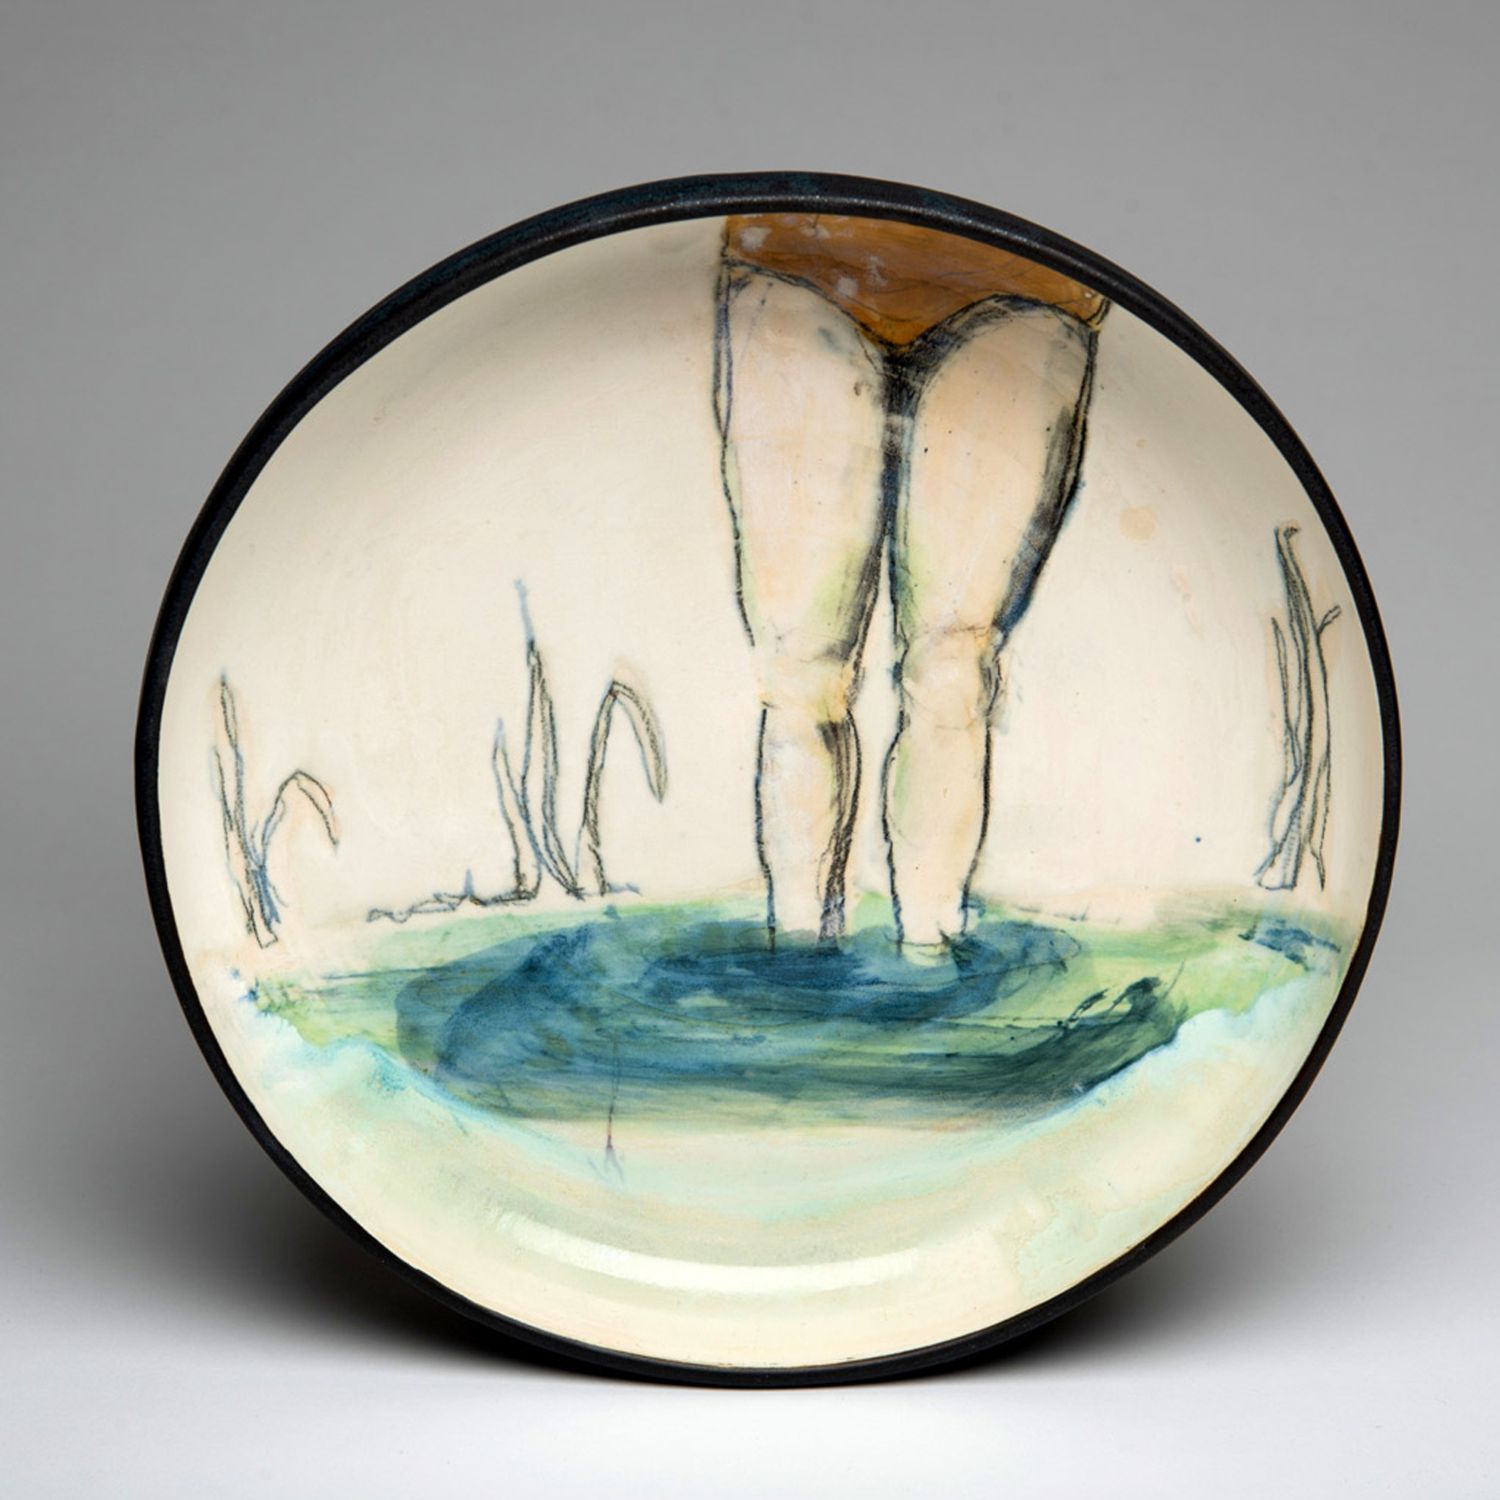 Lindsay Gravelle: Swimmer Plate Product Image 1 of 2